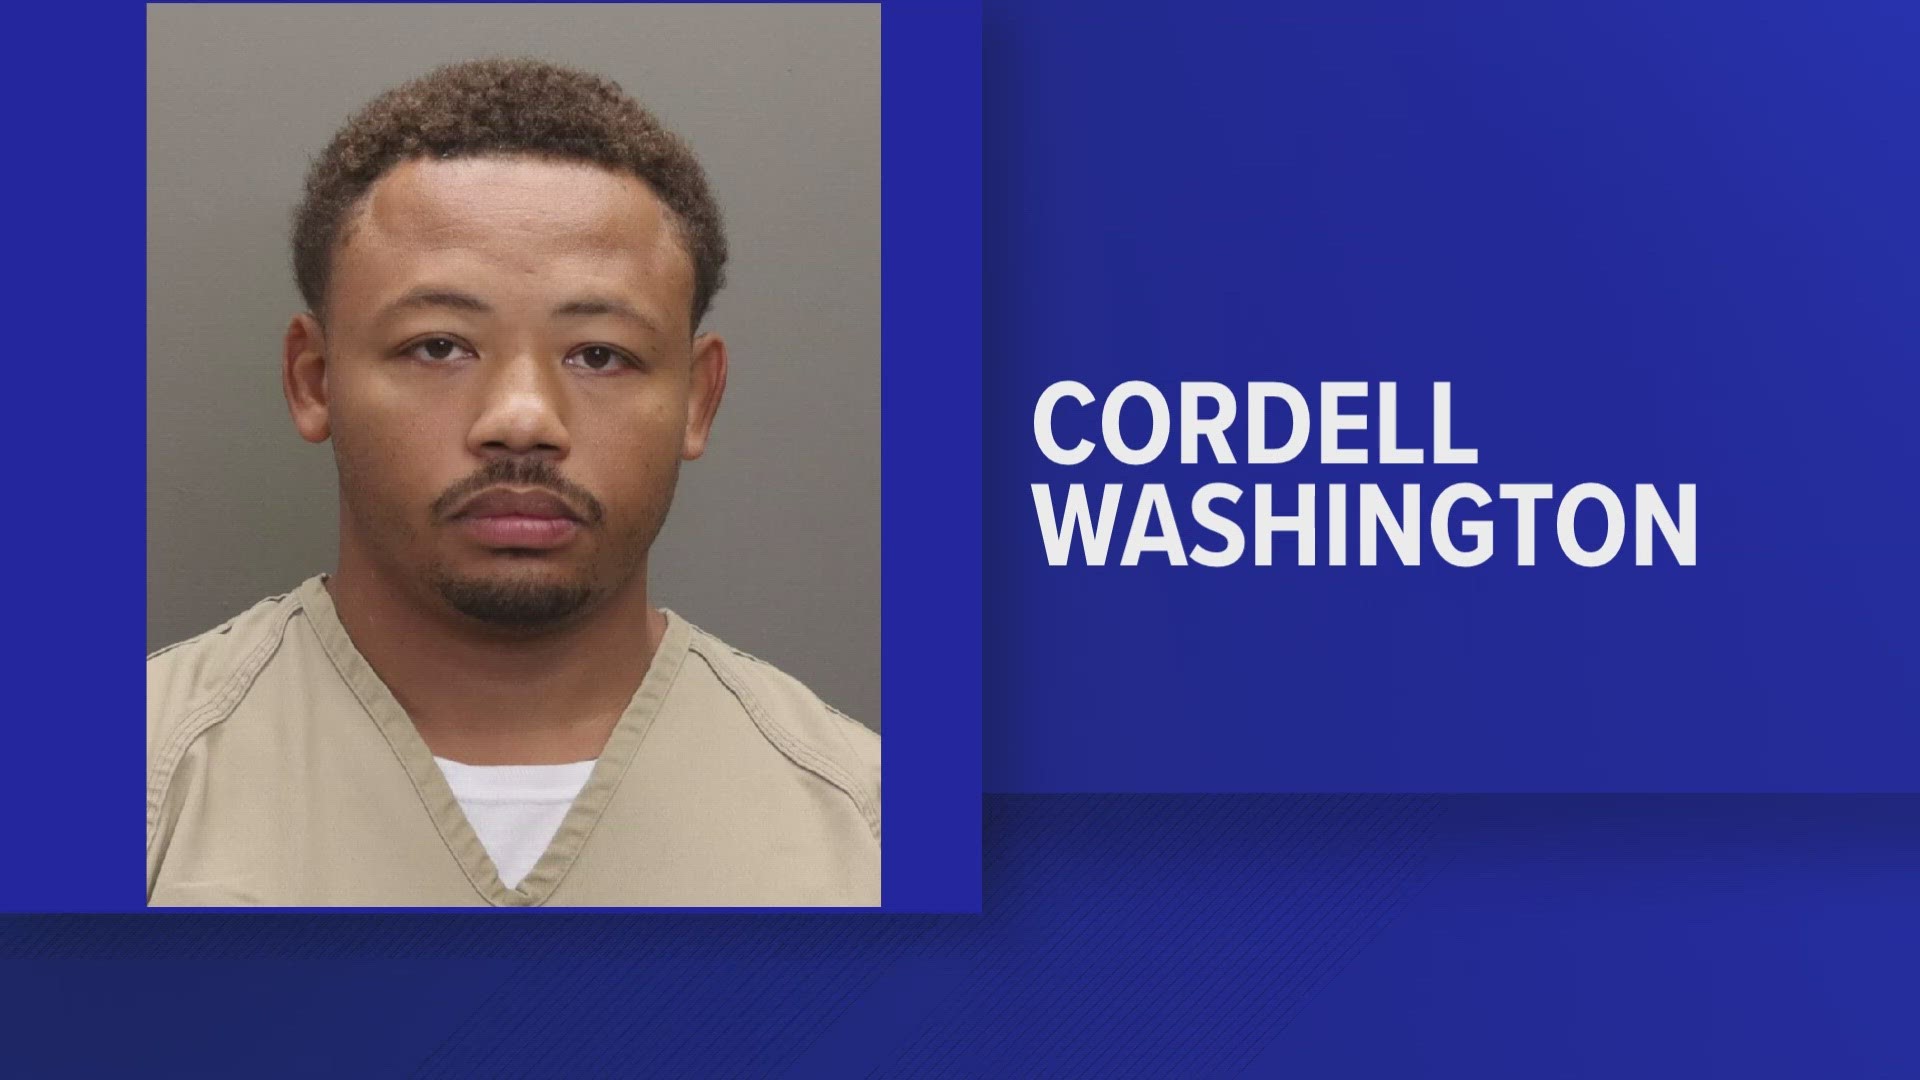 Cordell Washington, 37, was identified as a leader in a case with 23 others who were involved in narcotics and human trafficking conspiracies.